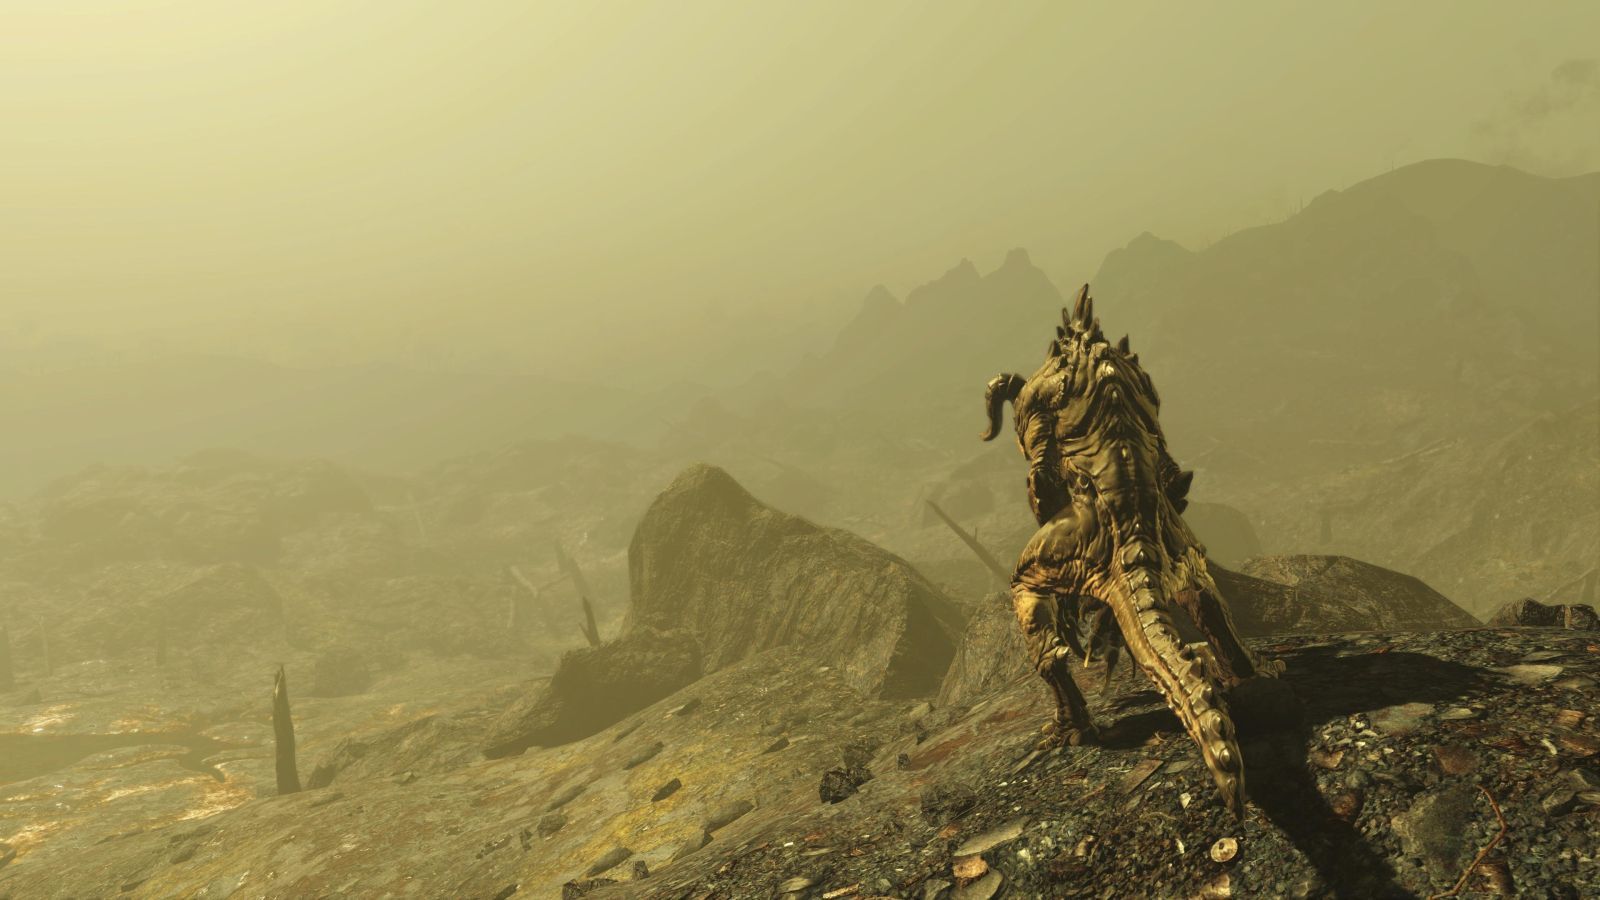 Fallout Deathclaw wallpaper in 1600x900 resolution